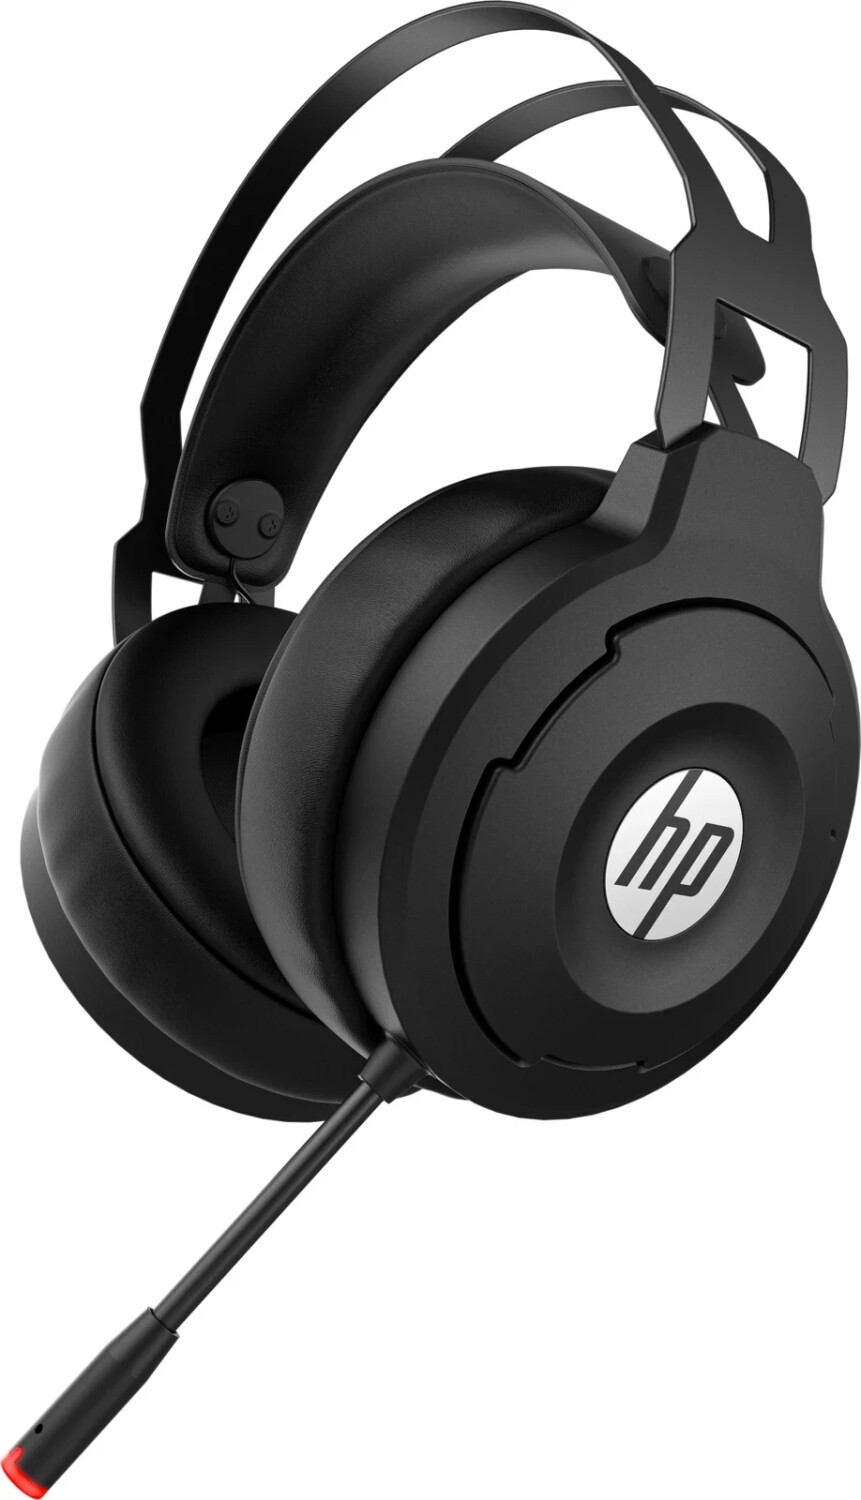 Casque gaming sans fil HP X1000 - HP Store Suisse